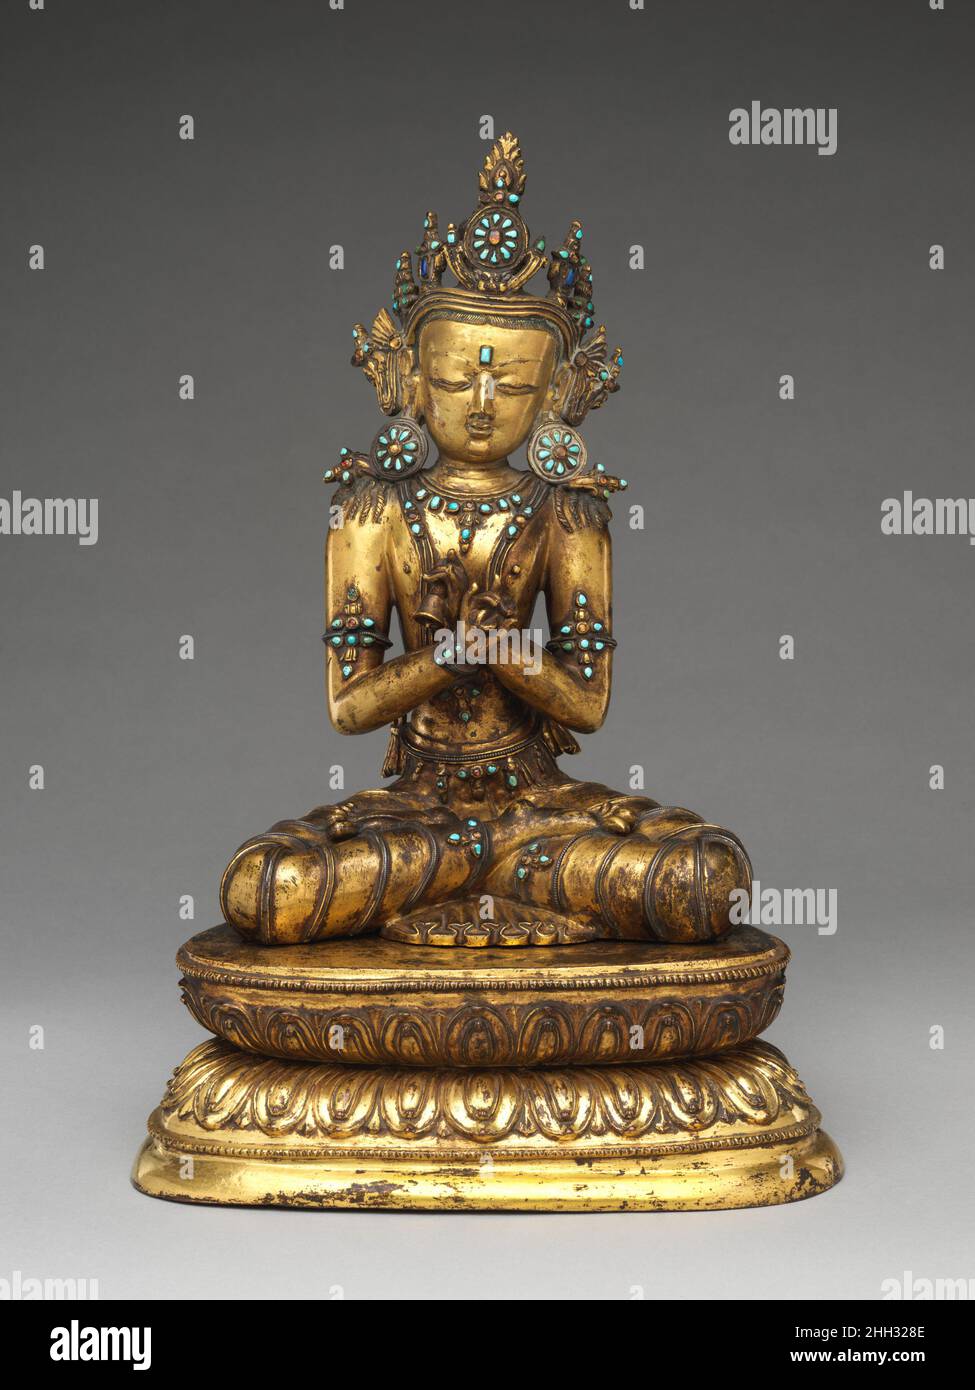 The Primordial Buddha Vajradhara 15th century Tibet The Buddha Vajradhara is a divine manifestation of the totality of Buddhist teachings and is credited with being the source of the Buddhist tantric texts. Here, he holds a vajra and a bell that symbolizes energy (male) and emptiness (female). This sculpture is remarkable for the many surviving original inset pieces of turquoise and semiprecious stones and for the silver wire inlay in his dhoti (loincloth). These components indicate his divine status and evoke the crystalline nature of the heaven where he resides.. The Primordial Buddha Vajrad Stock Photo